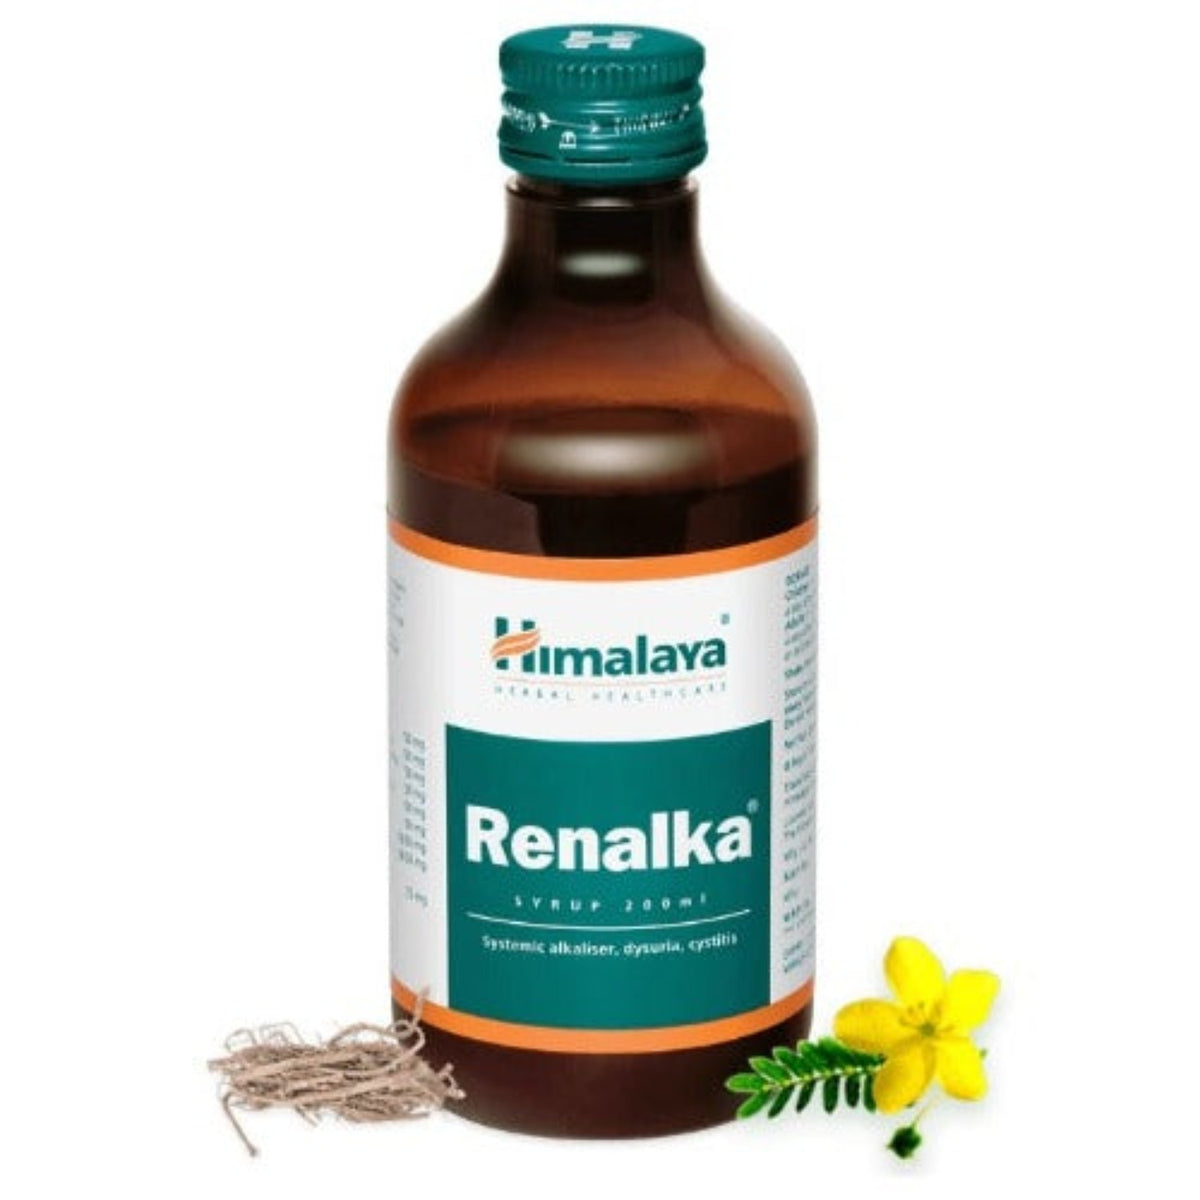 Himalaya Herbal Ayurvedic Renalka Women's Health The Coolant Of The Urinary Tract Syrup